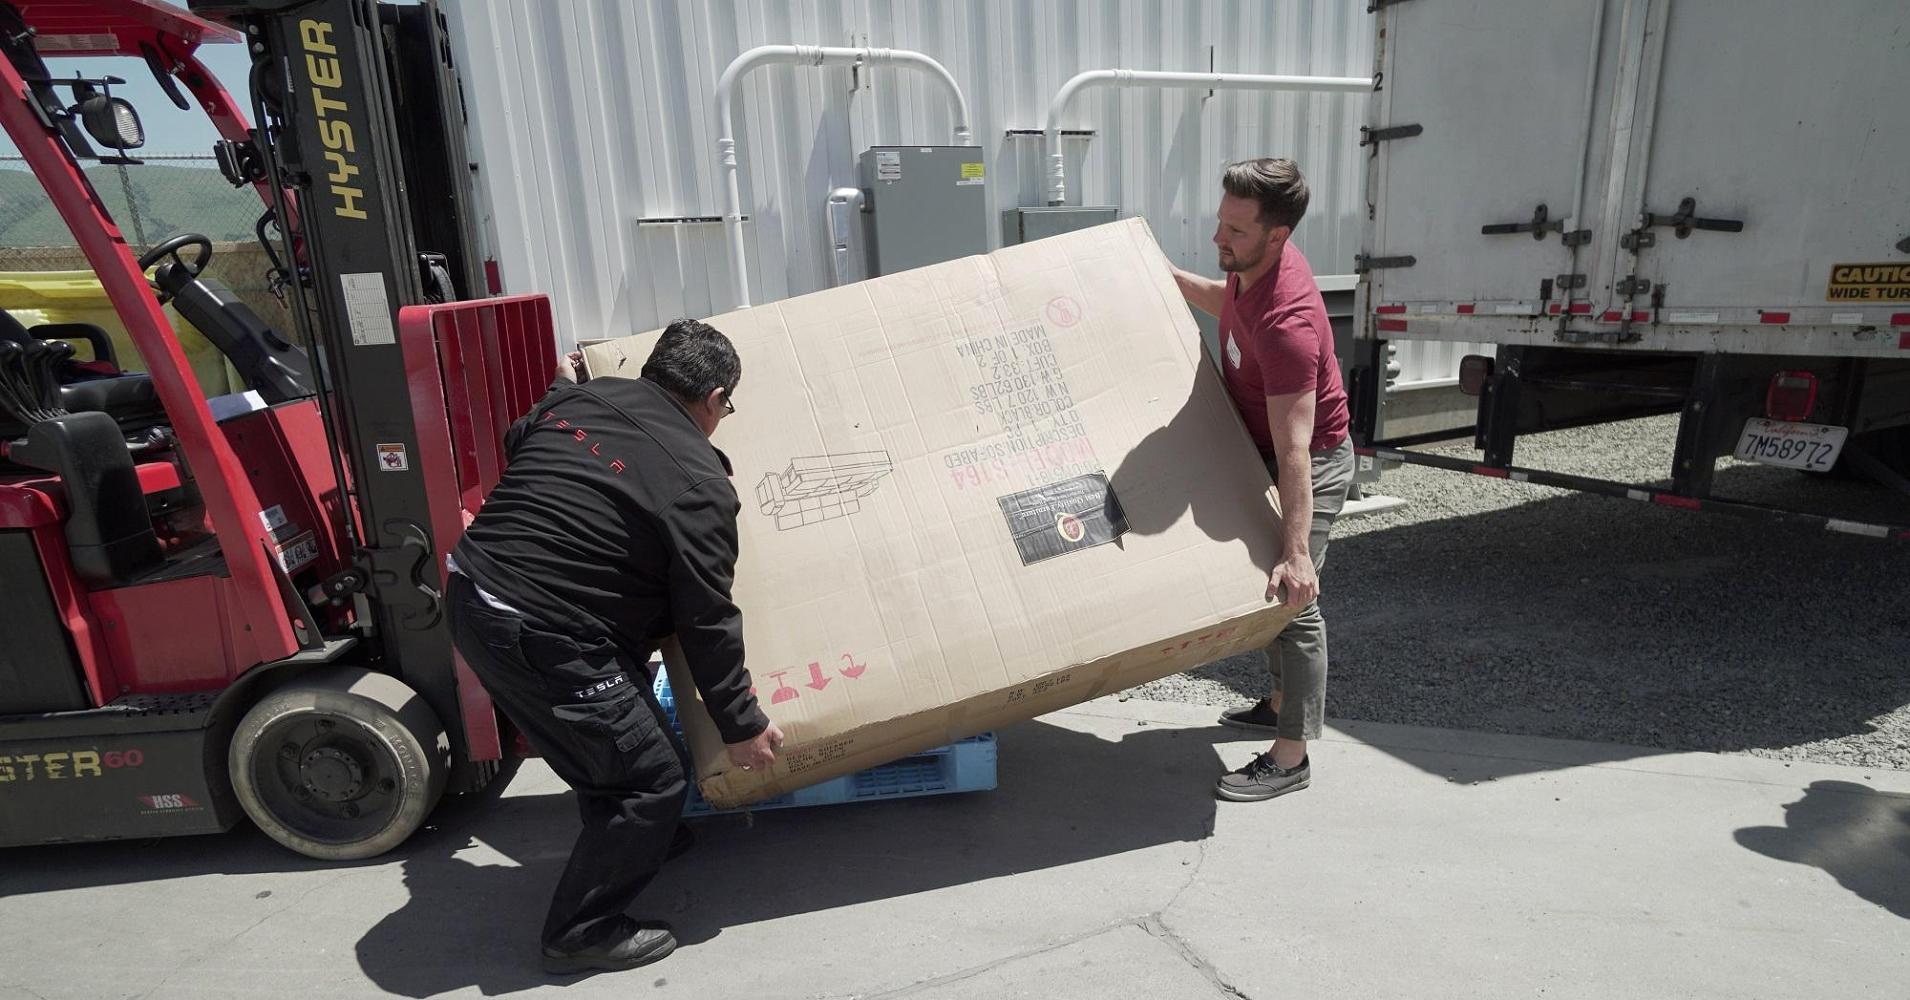 YouTuber Ben Sullins (right) delivers a brand new couch to the Tesla factory in Fremont, California on May 1, 2018. Photo: YouTube/Teslanomics by Ben Sullins